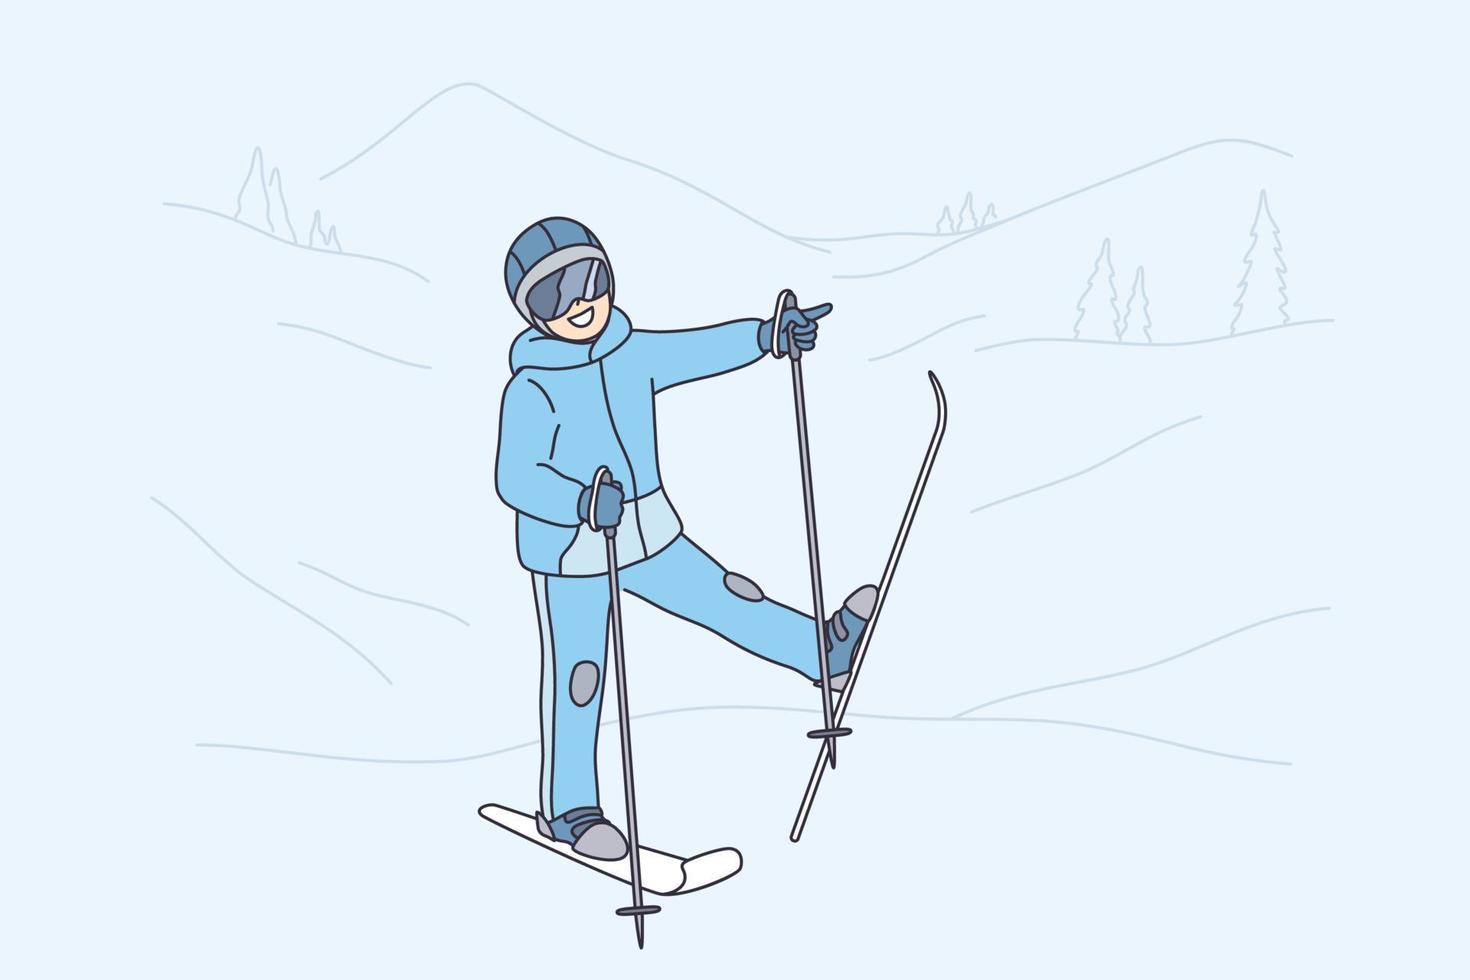 Winter activities and leisure concept. Smiling child kid cartoon character in sports costume standing and ready for sliding down hill slope vector illustration